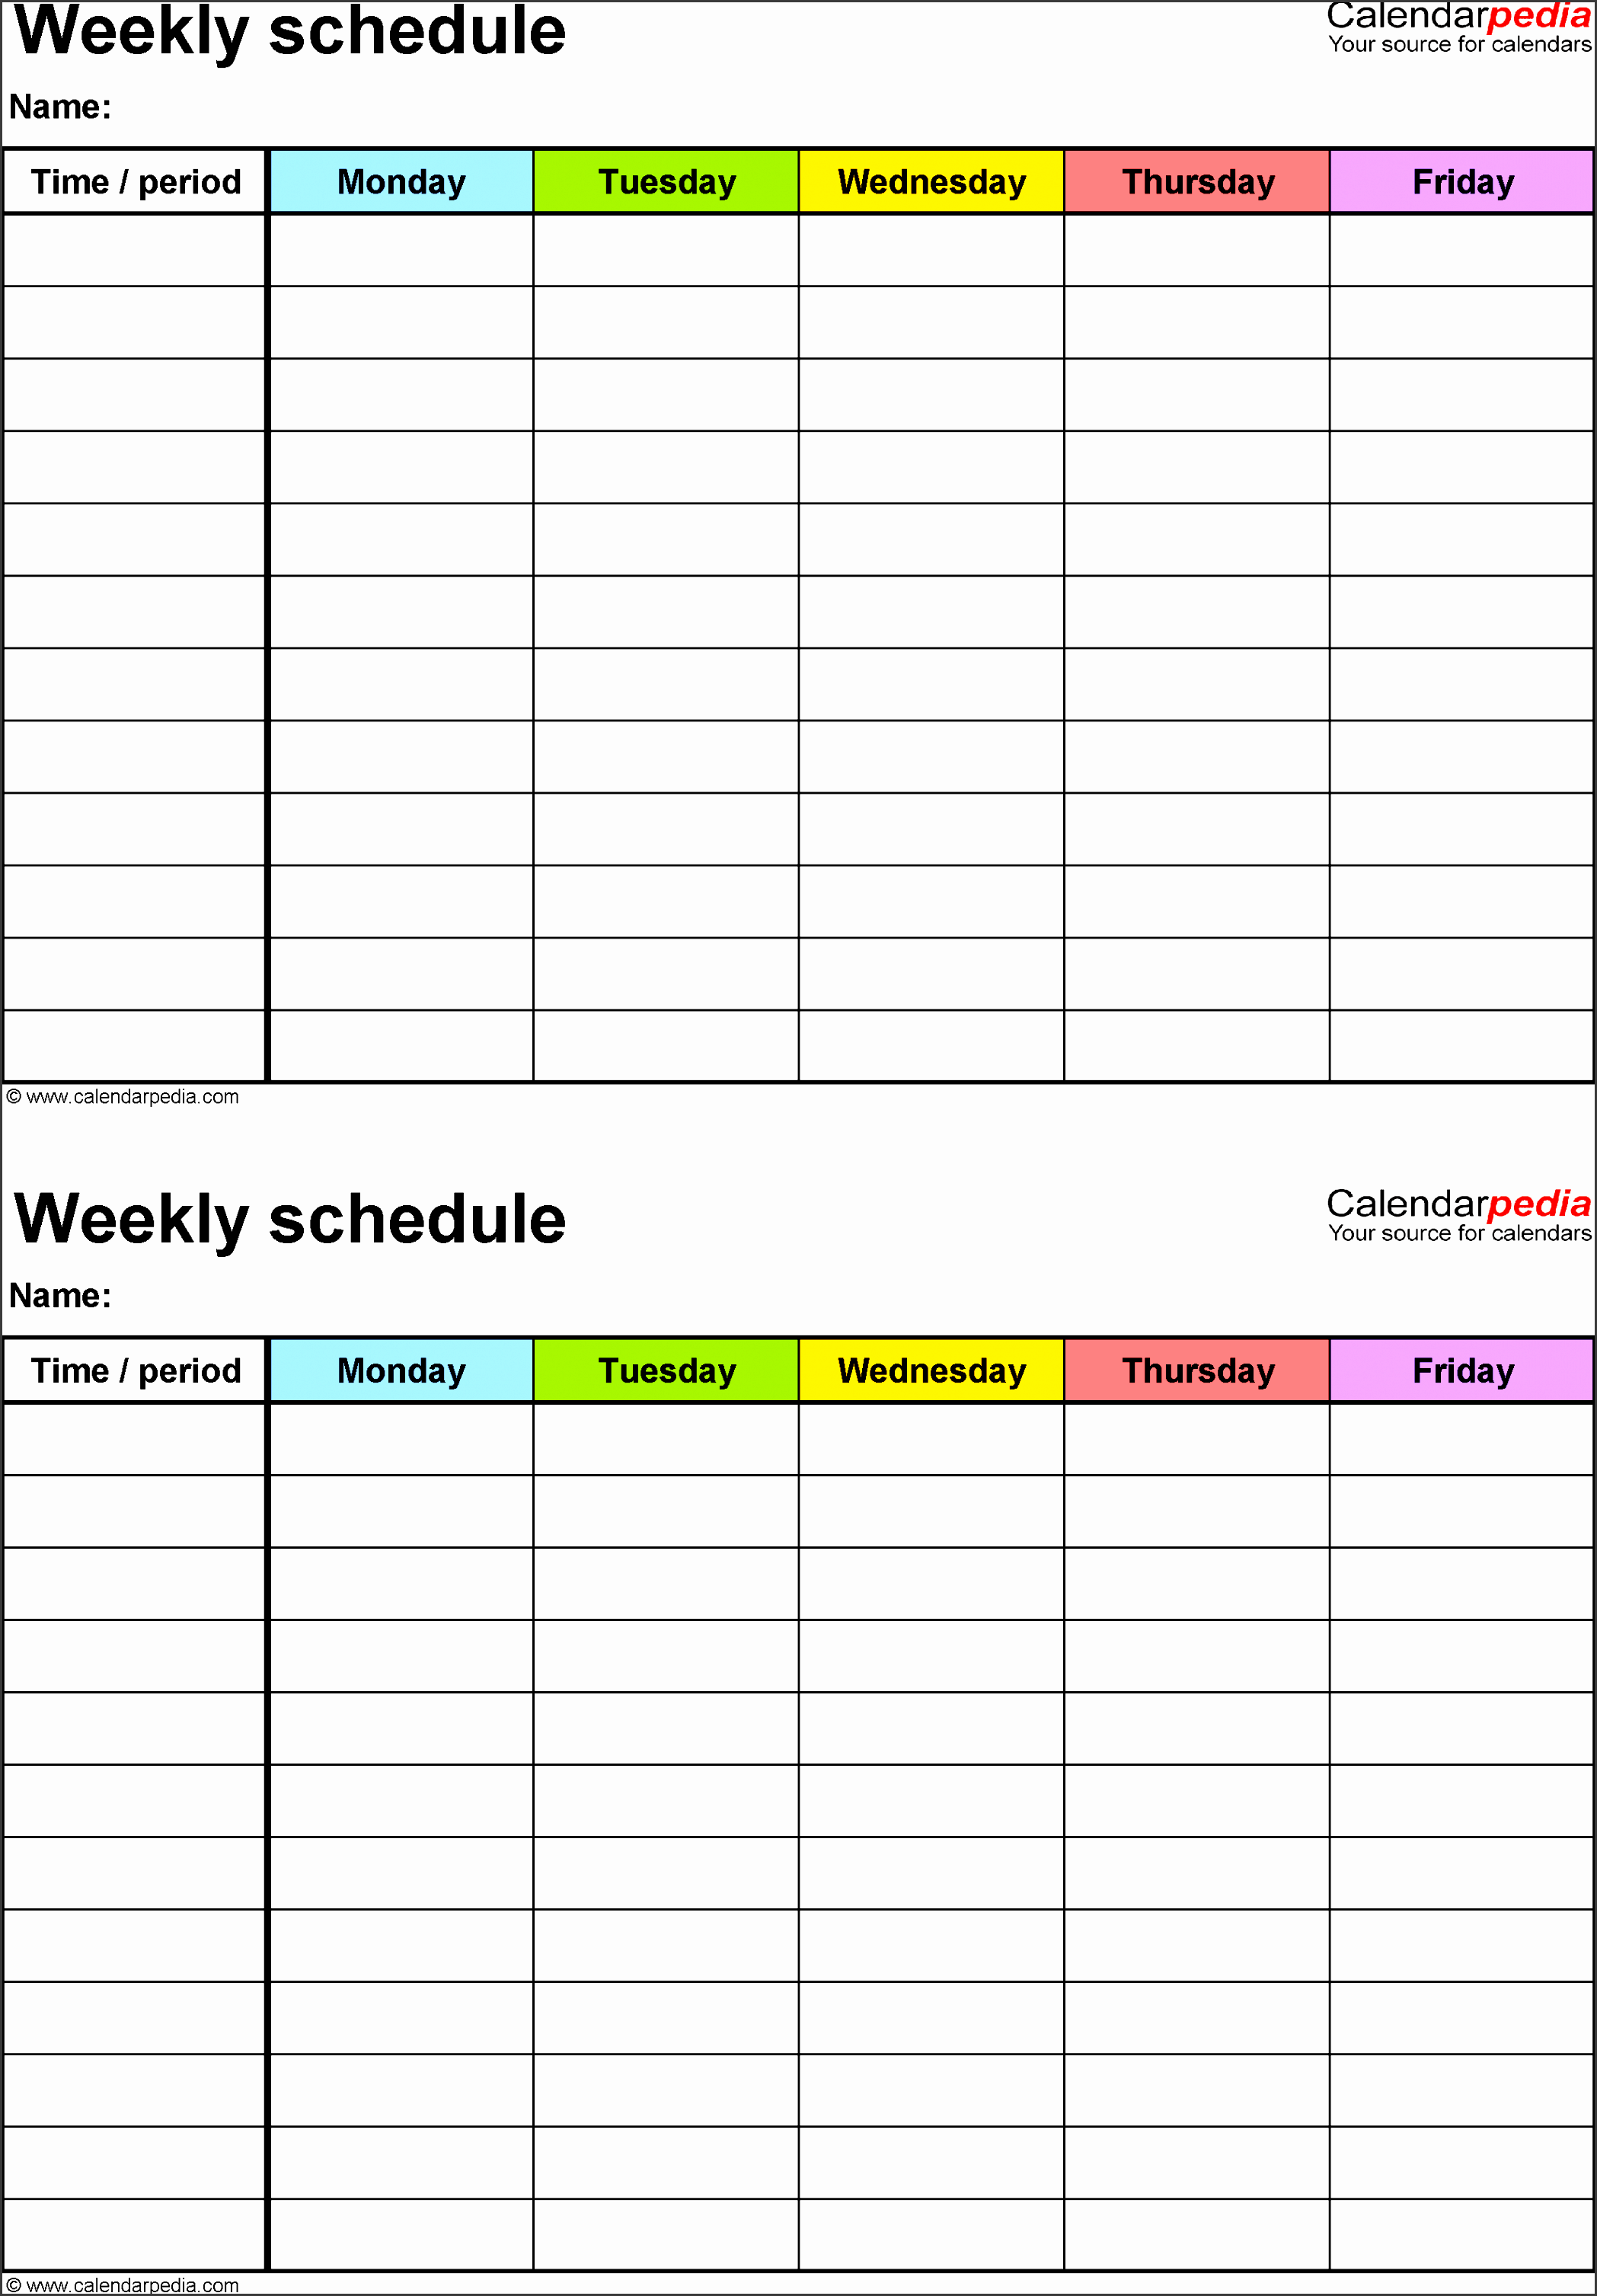 weekly schedule template for excel version 3 2 schedules on one page portrait